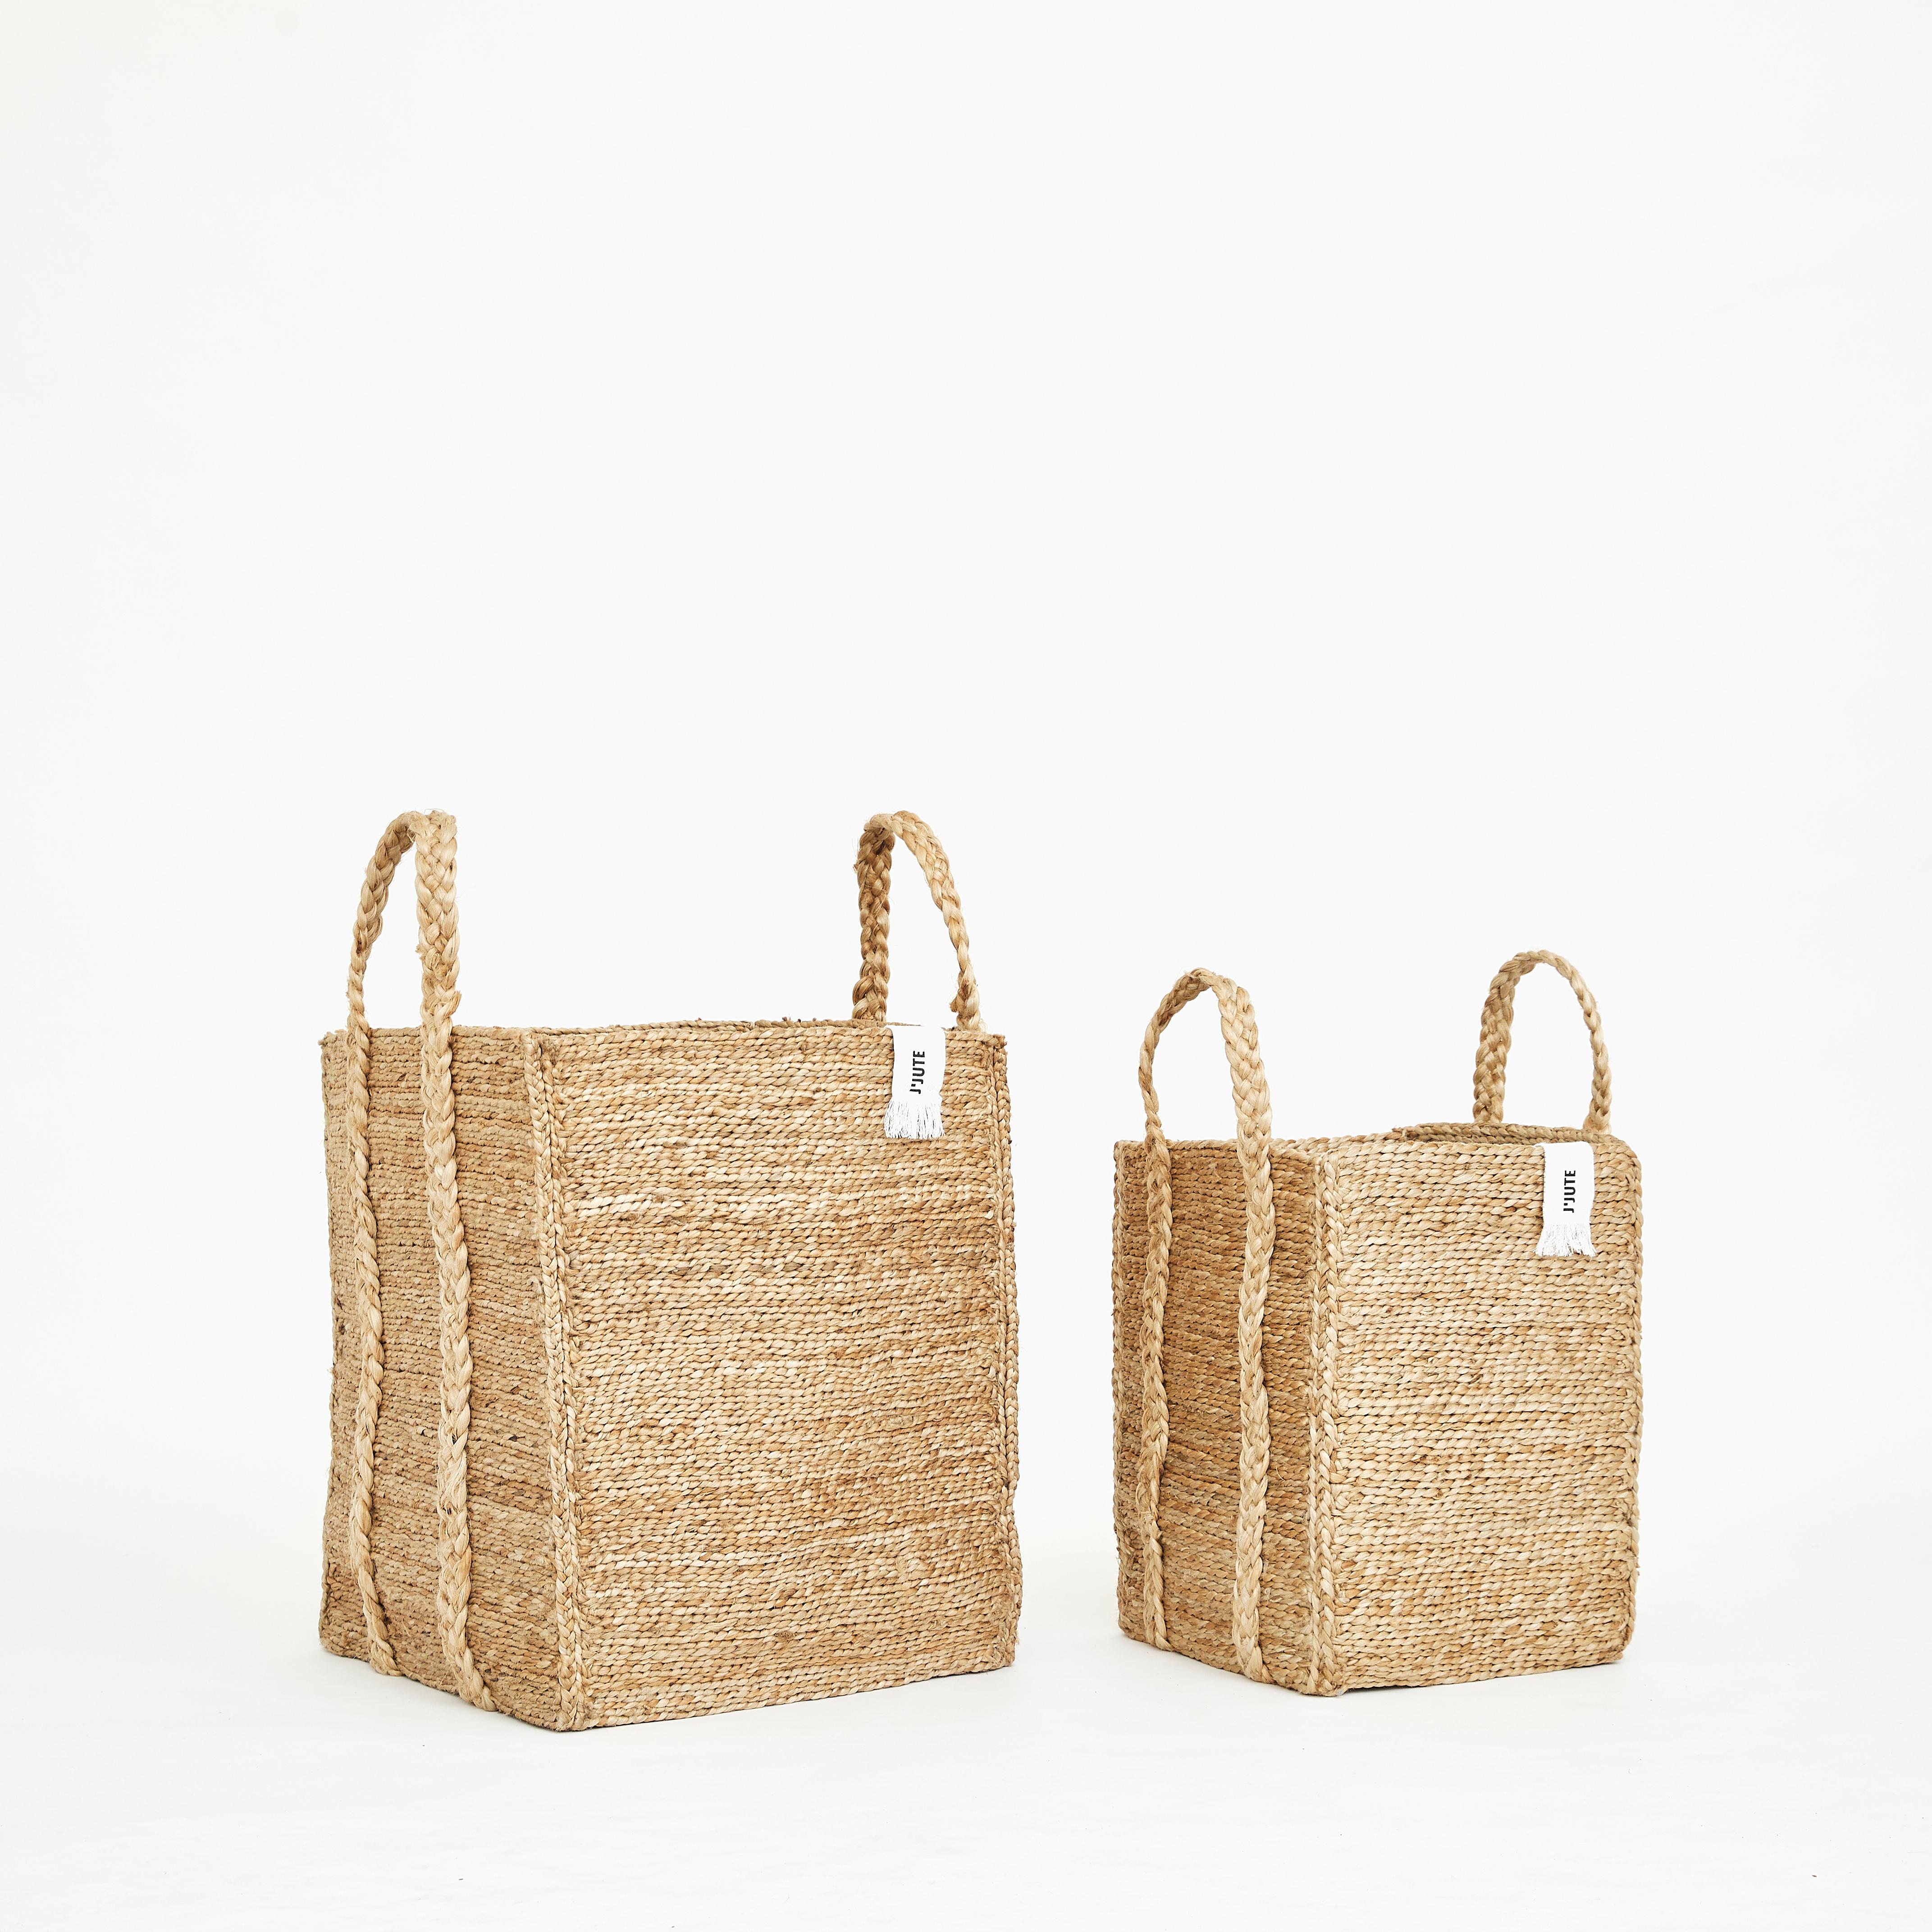 J'Jute Bronte Rectangular Jute Basket Large, Natural

J'Jute is an Australian Luxury Home Brand that offers uncompromising quality handmade objects for the home. Each J'Jute style is designed by Taylor and Nicholas Barber in Bondi Beach, Australia